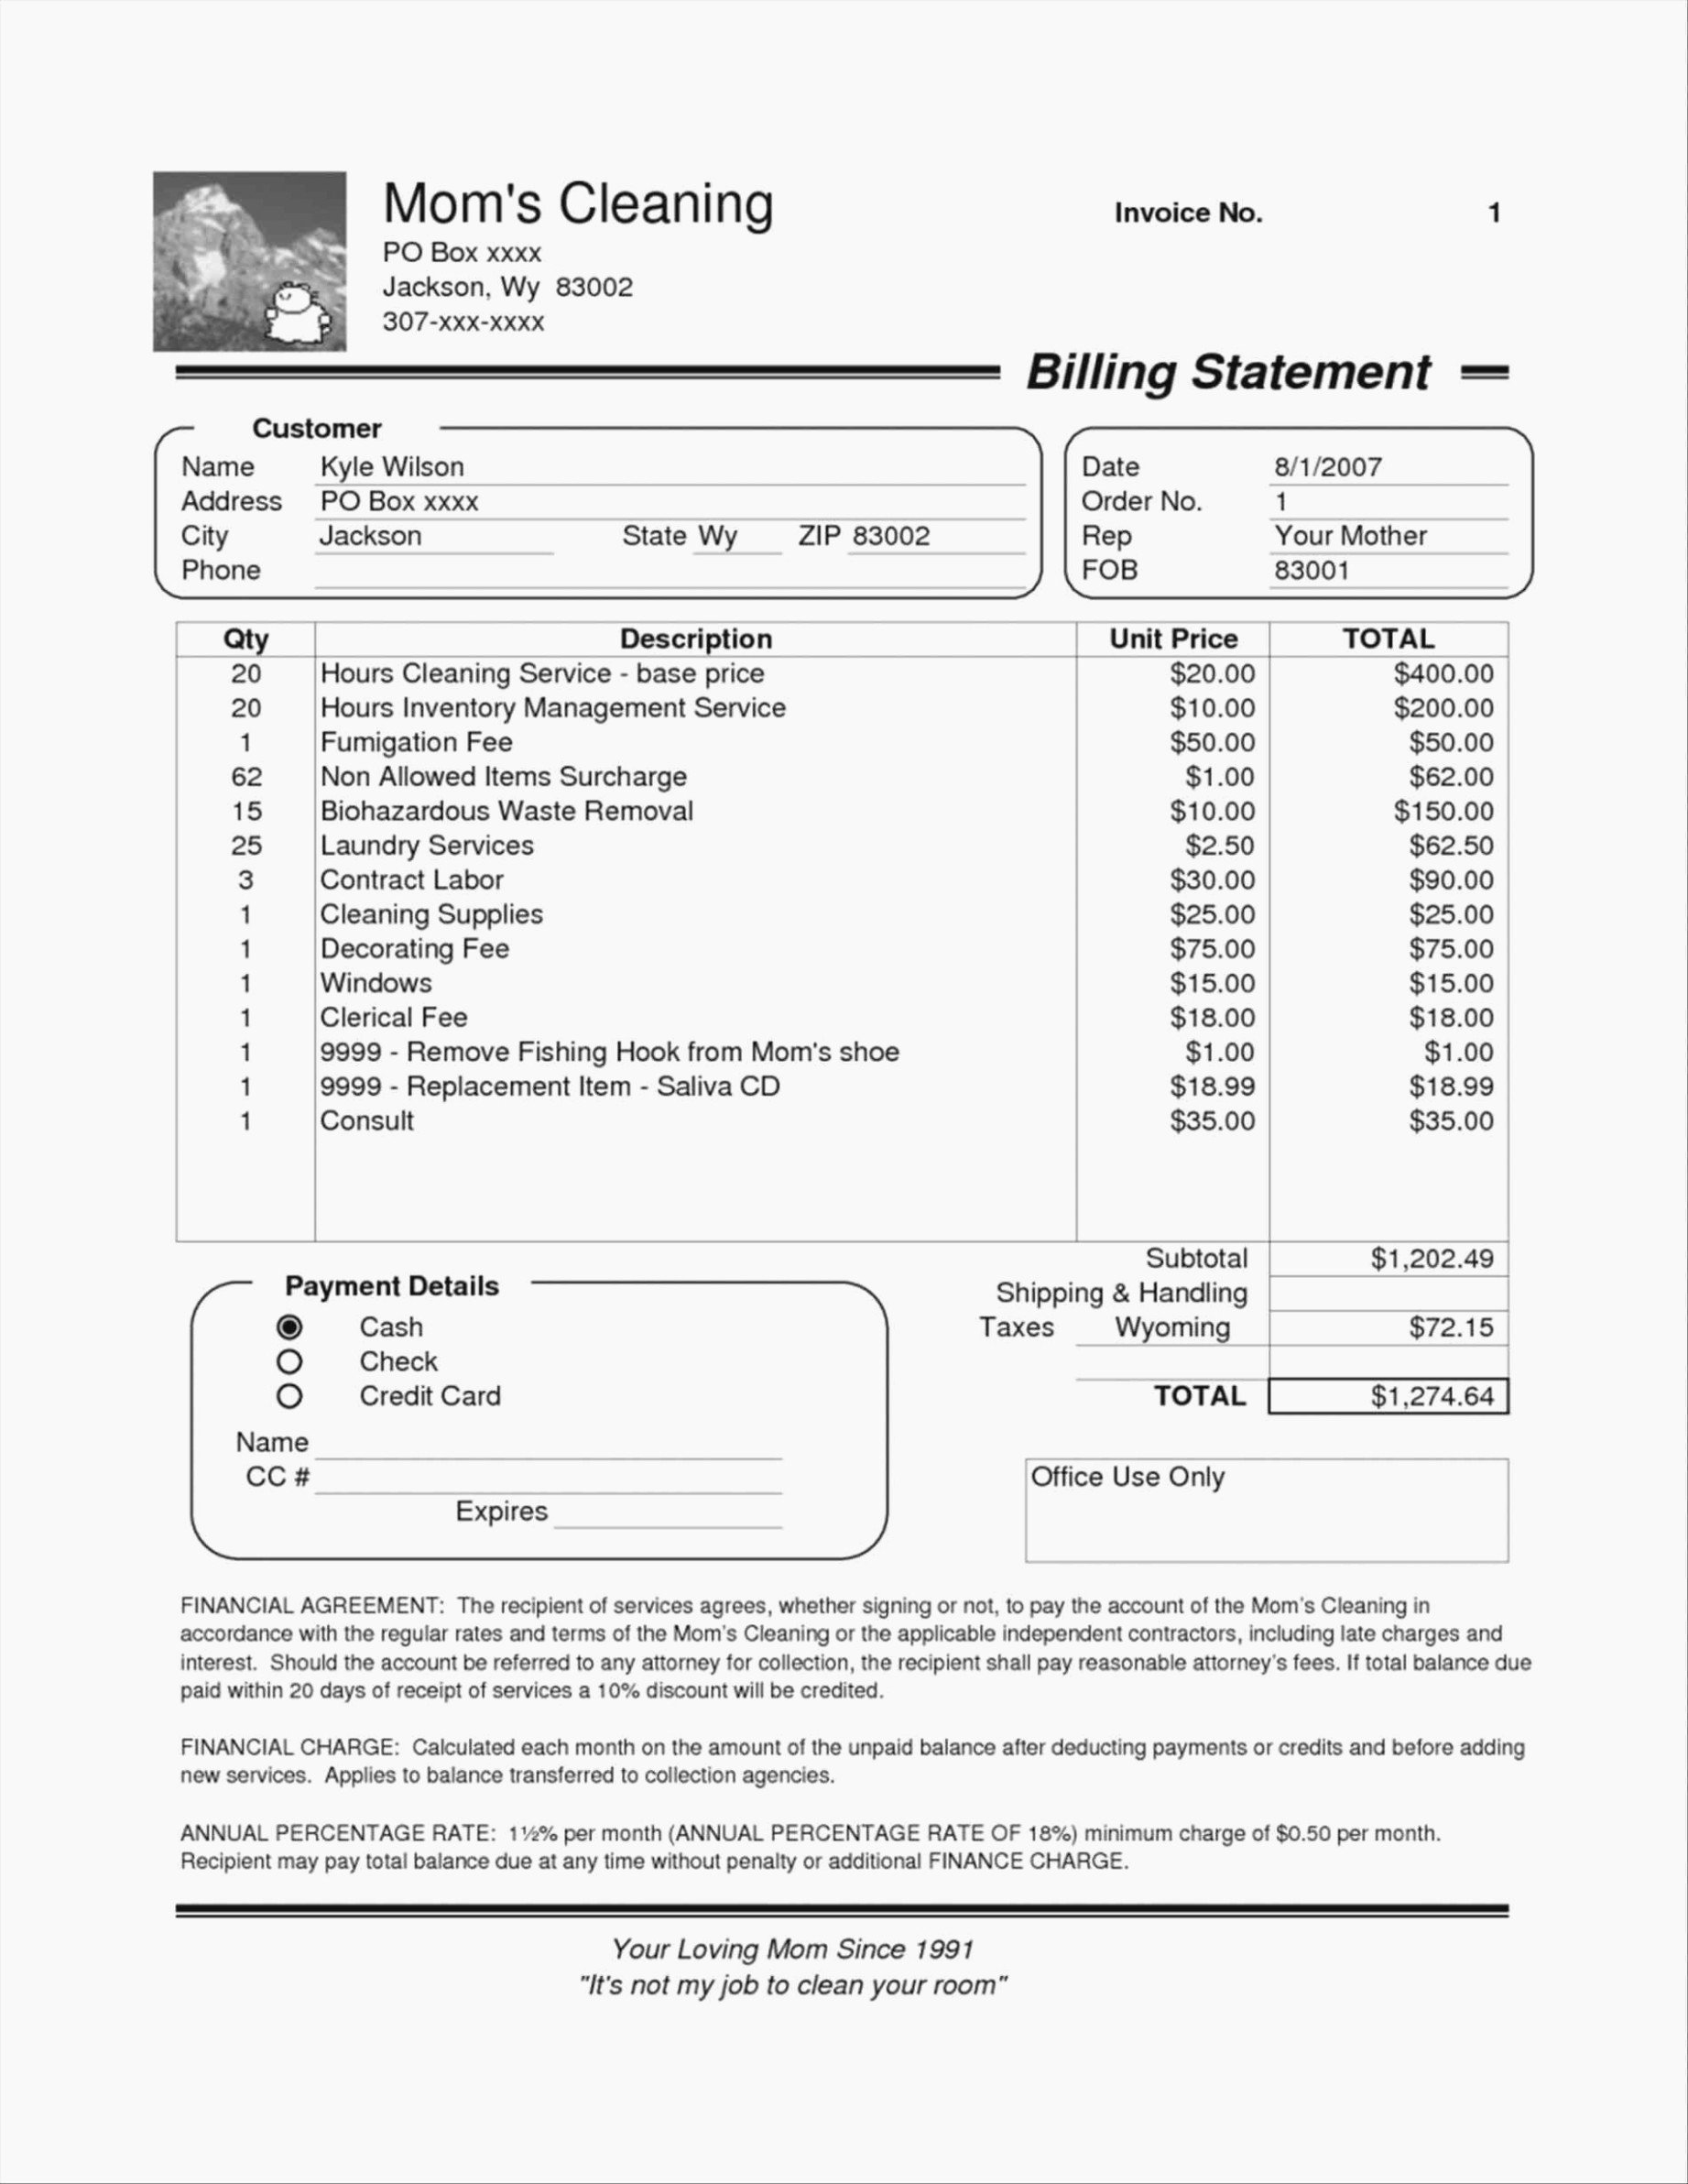 Tree Service Invoice Template Elegant Five Things You Won T Miss